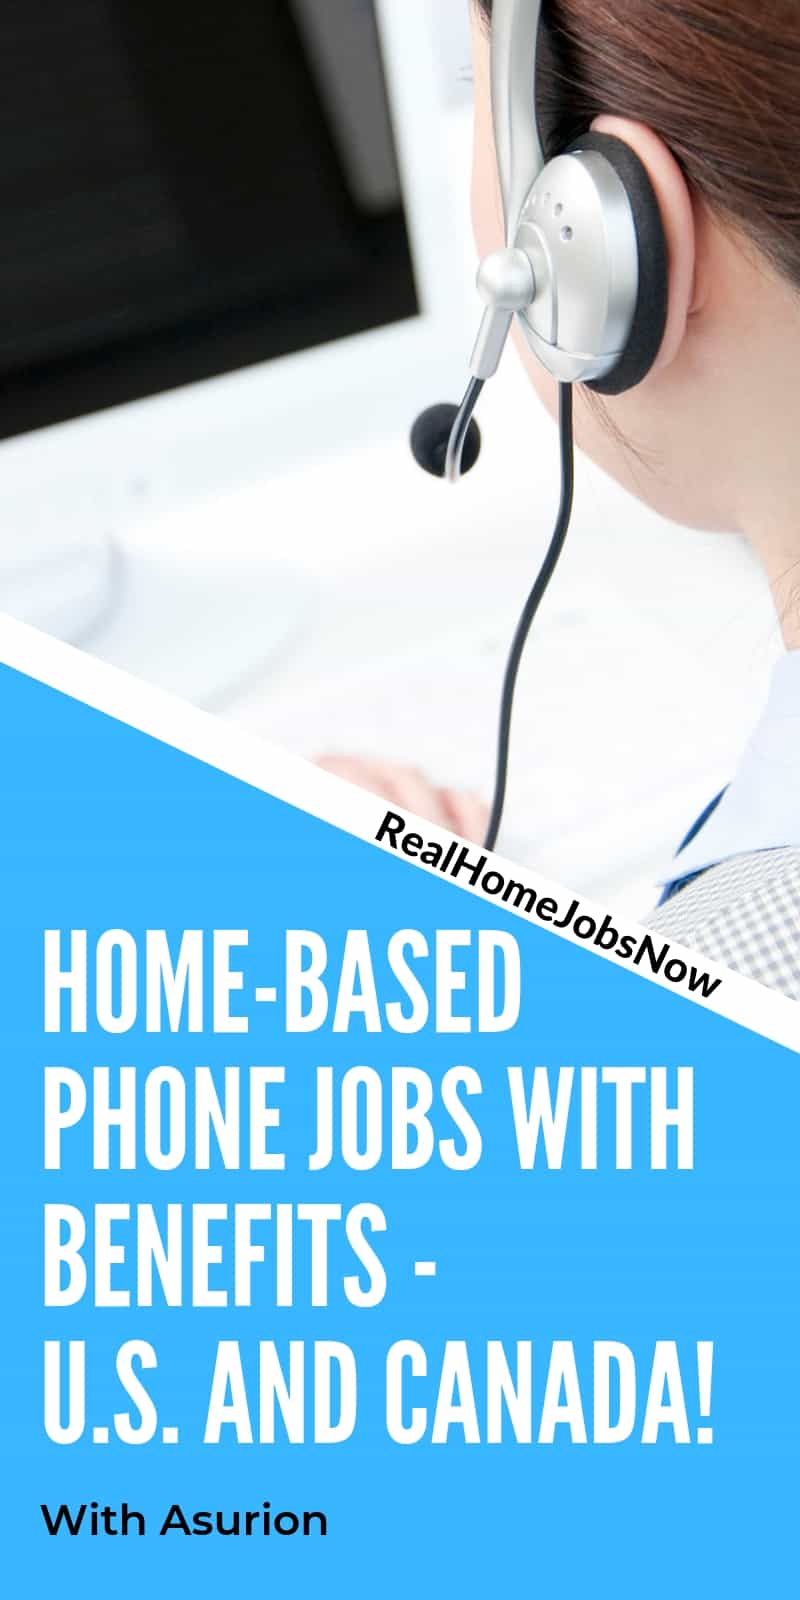 Asurion hires agents to work from home as benefits-eligible employees!